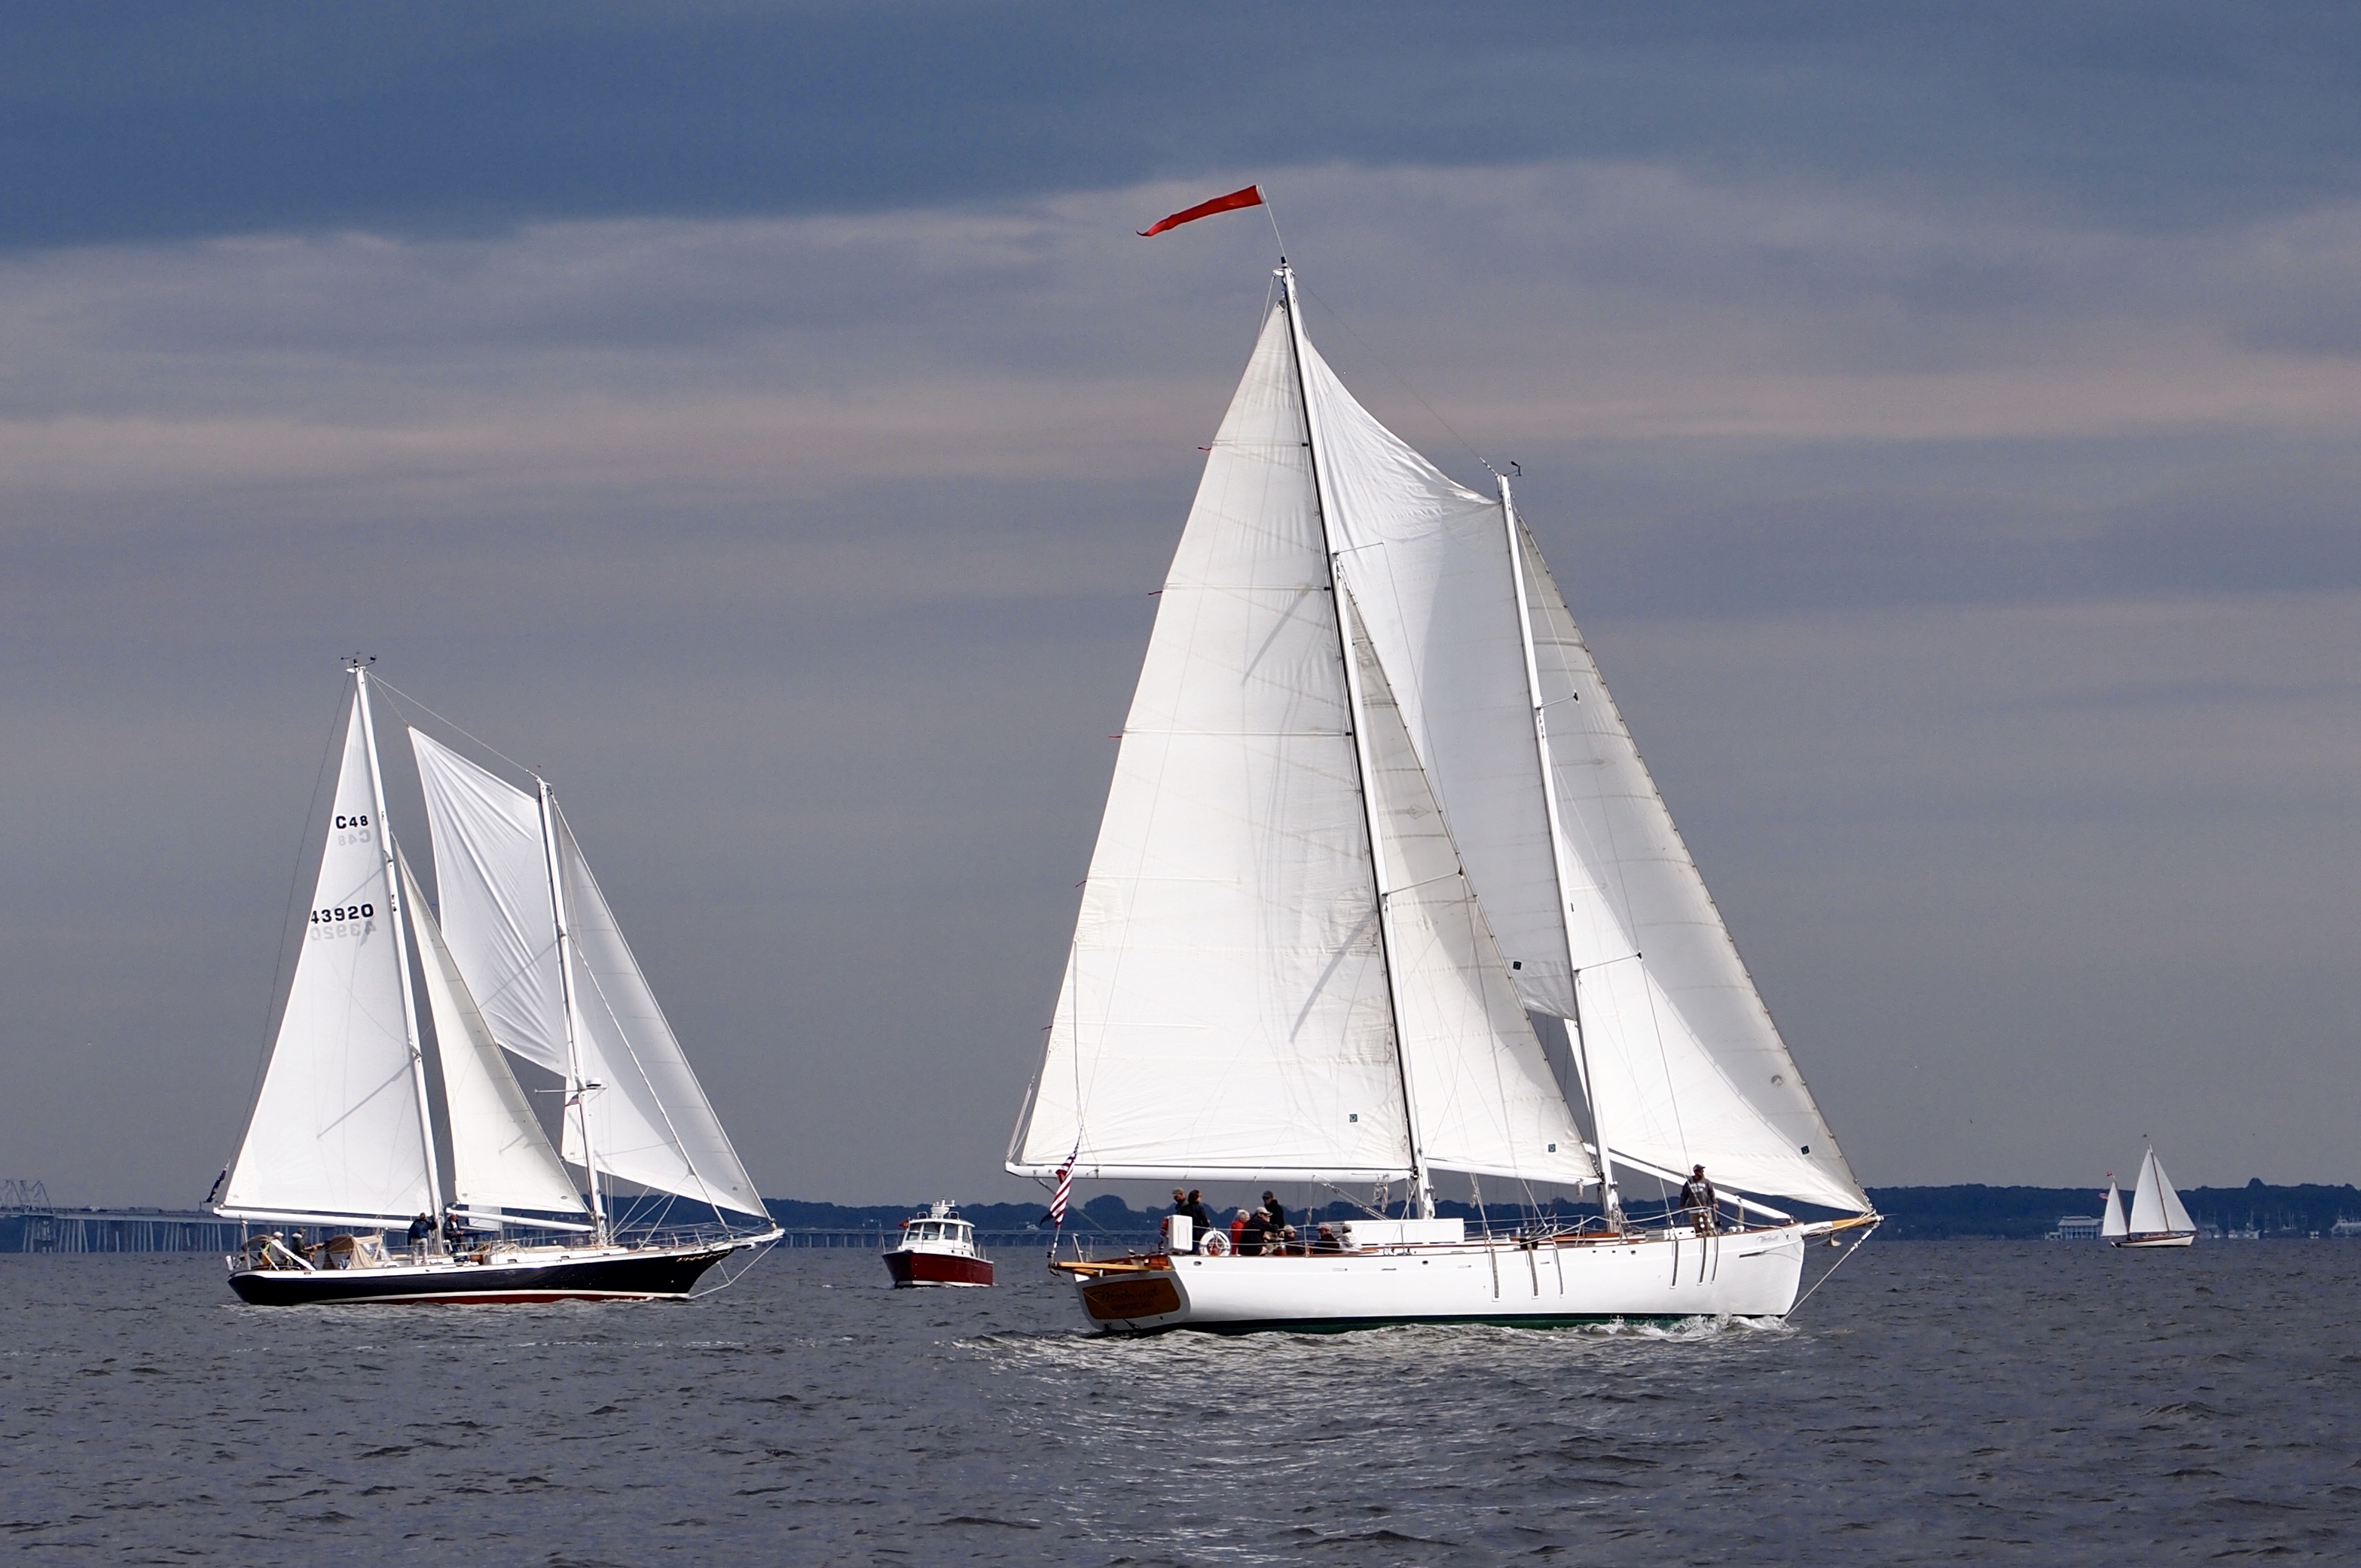 Different schooners on a dark cloudy day sailing on the bay